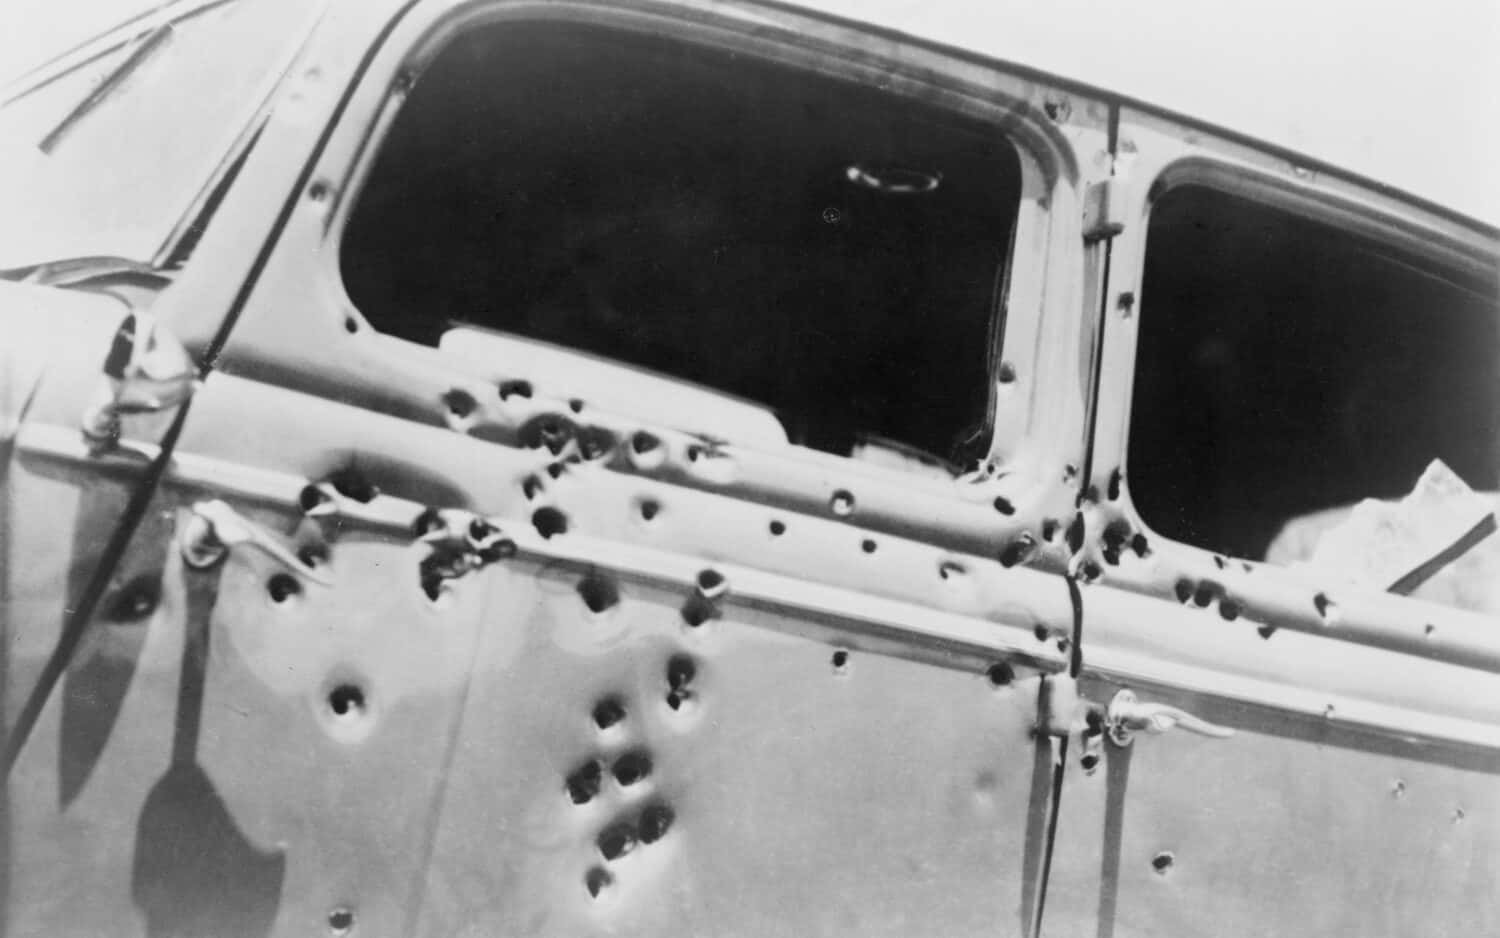 The bullet riddled car in which bank robbers Bonnie and Clyde died at the hands of Texas Rangers and Louisana police at Gibsland, Louisiana on May 23, 1934.